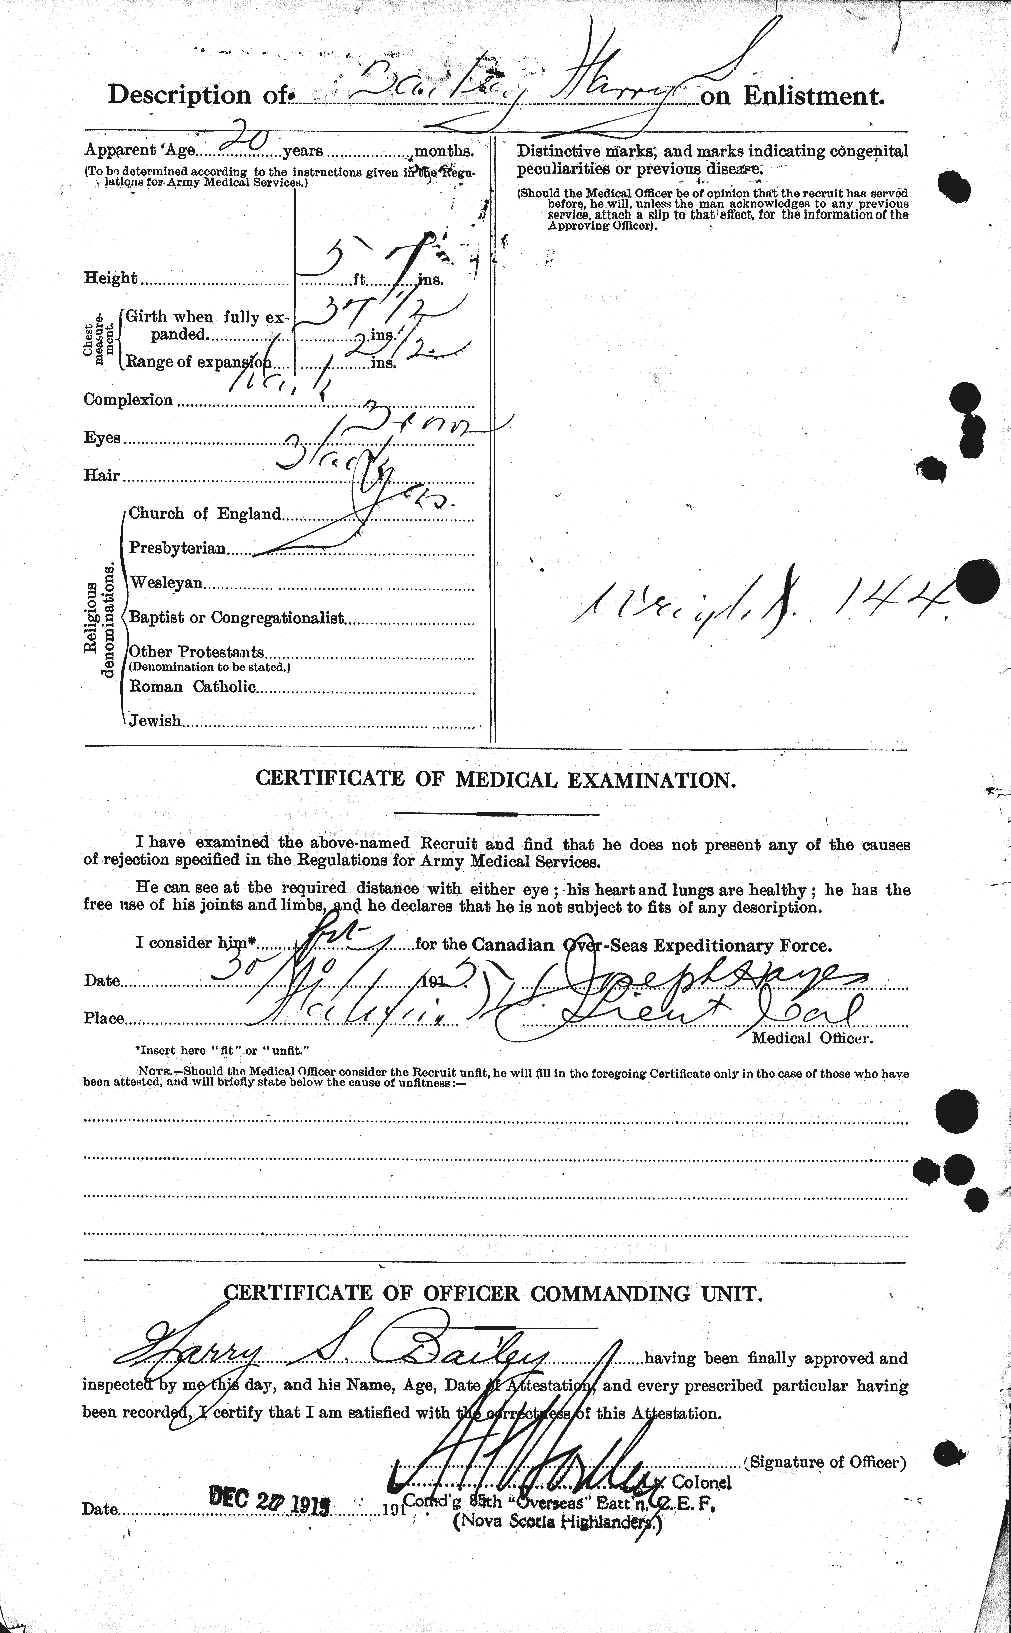 Personnel Records of the First World War - CEF 218905b